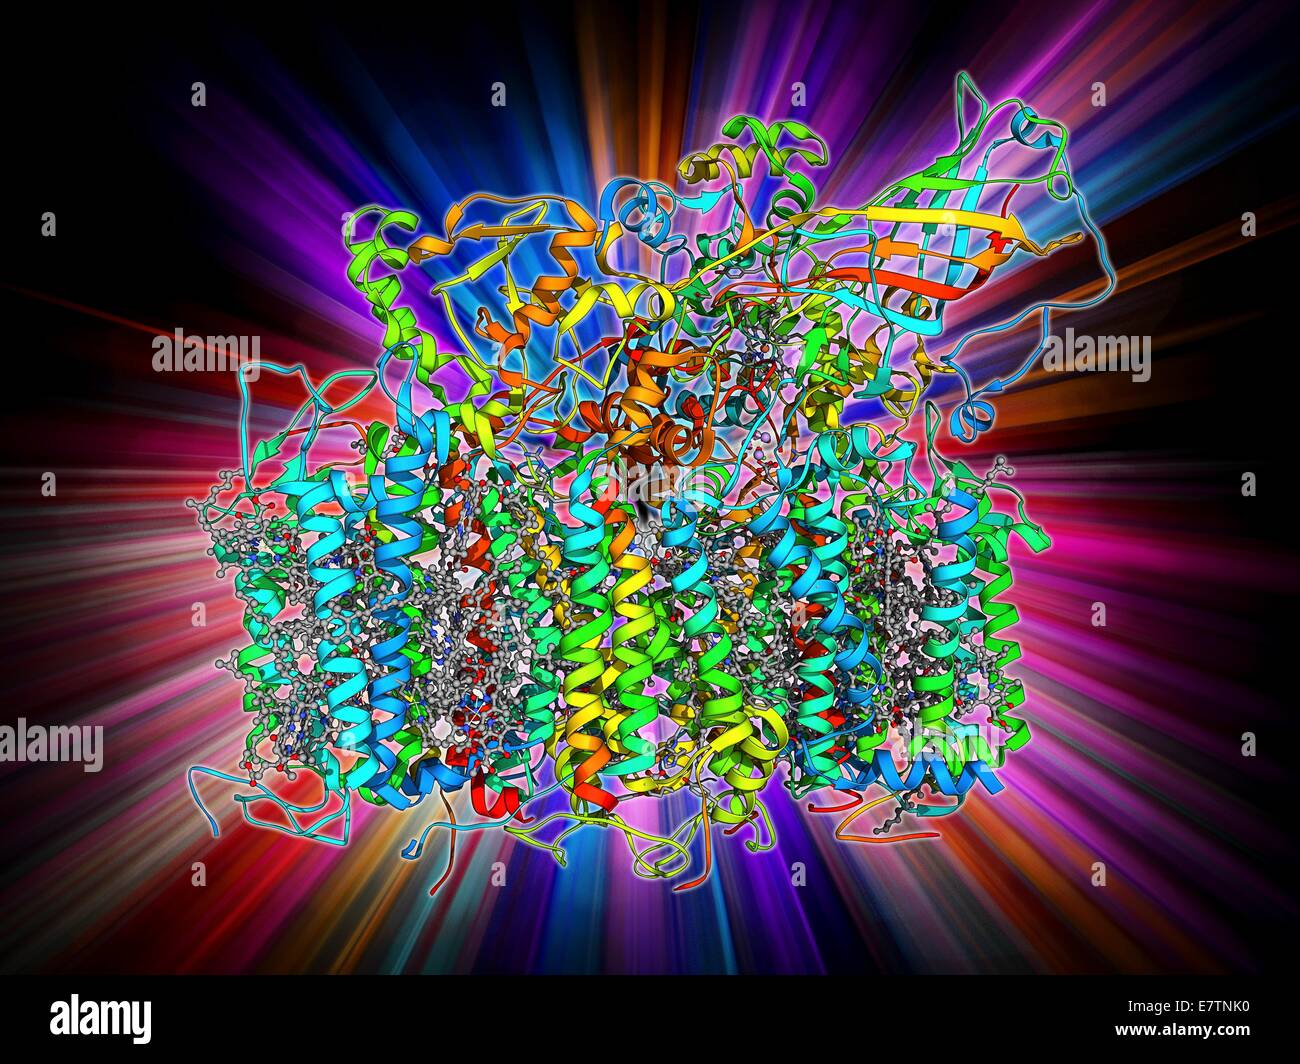 Photosystem II. Molecular model of the photosystem II complex. Photosystems are protein complexes involved in photosynthesis. Photosystem II is found on the thylakoid membranes of cyanobacteria, algae and plants. It is the first step in photosynthesis. It Stock Photo